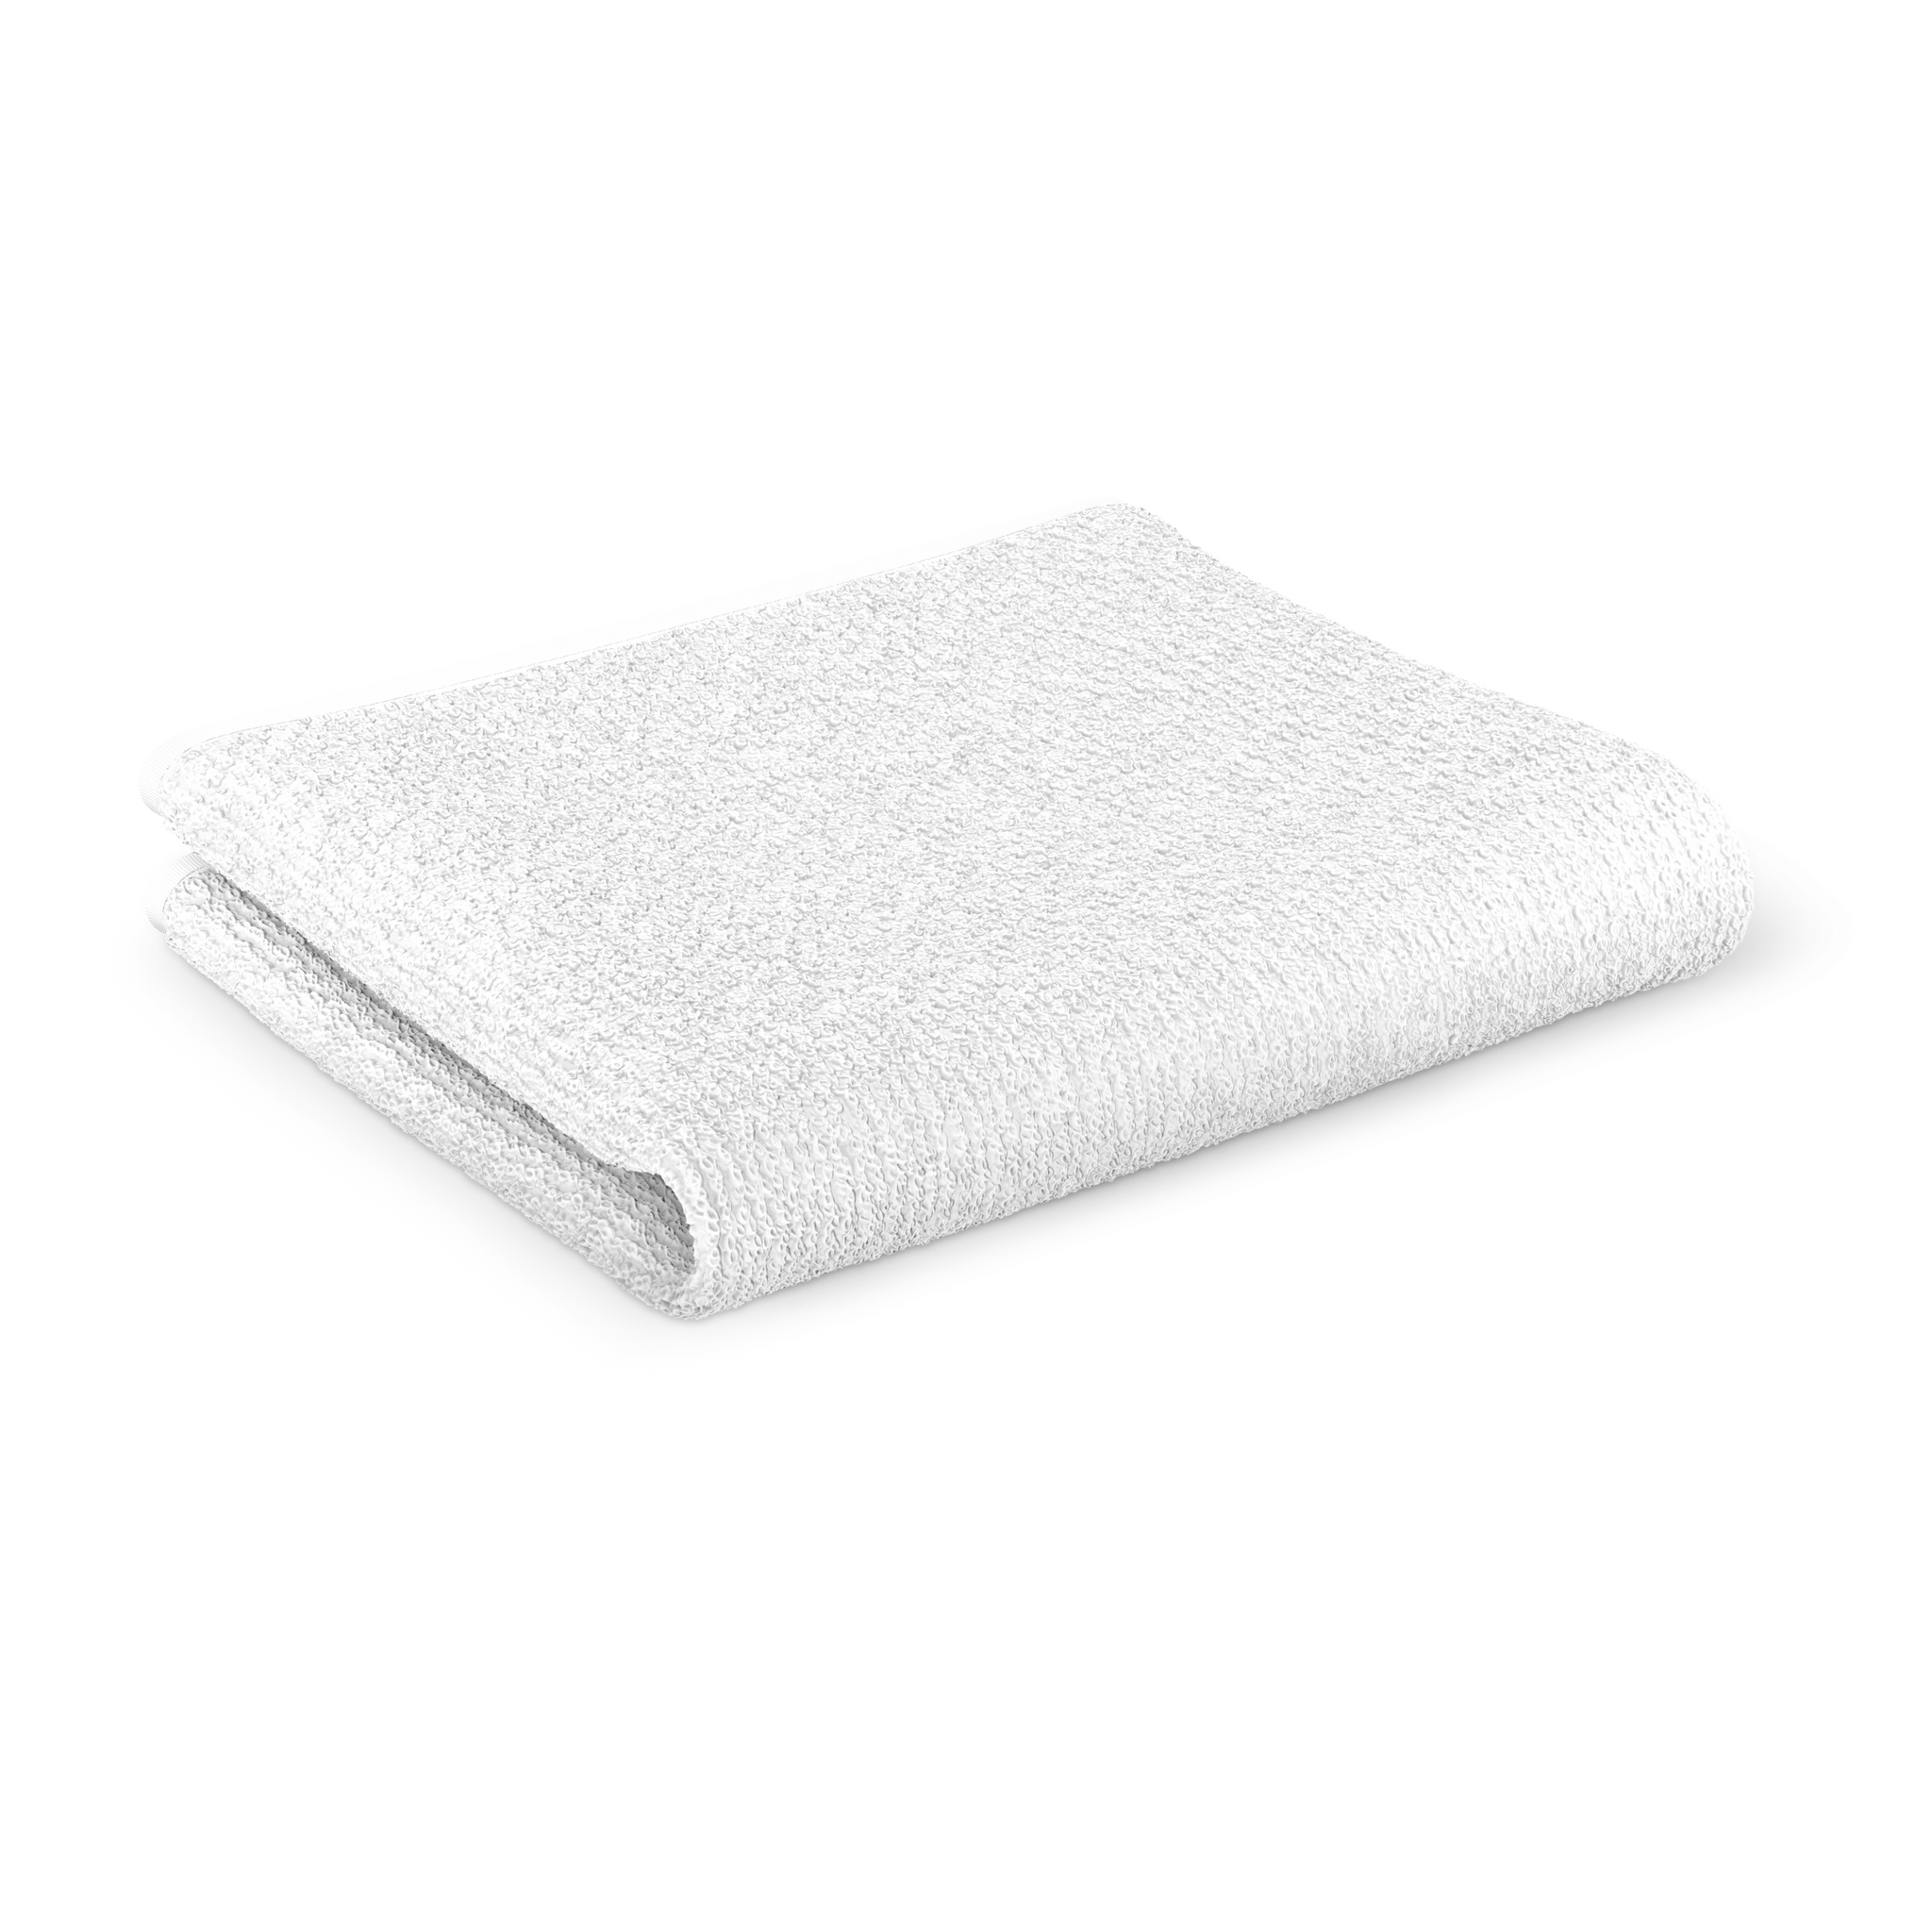 TRU47 10” Stellarcleenz Sanitized Silver Cloth - High Performance Silver  Cleaning Cloth/Smooth Silver Fabric/Self Sanitizing/Long